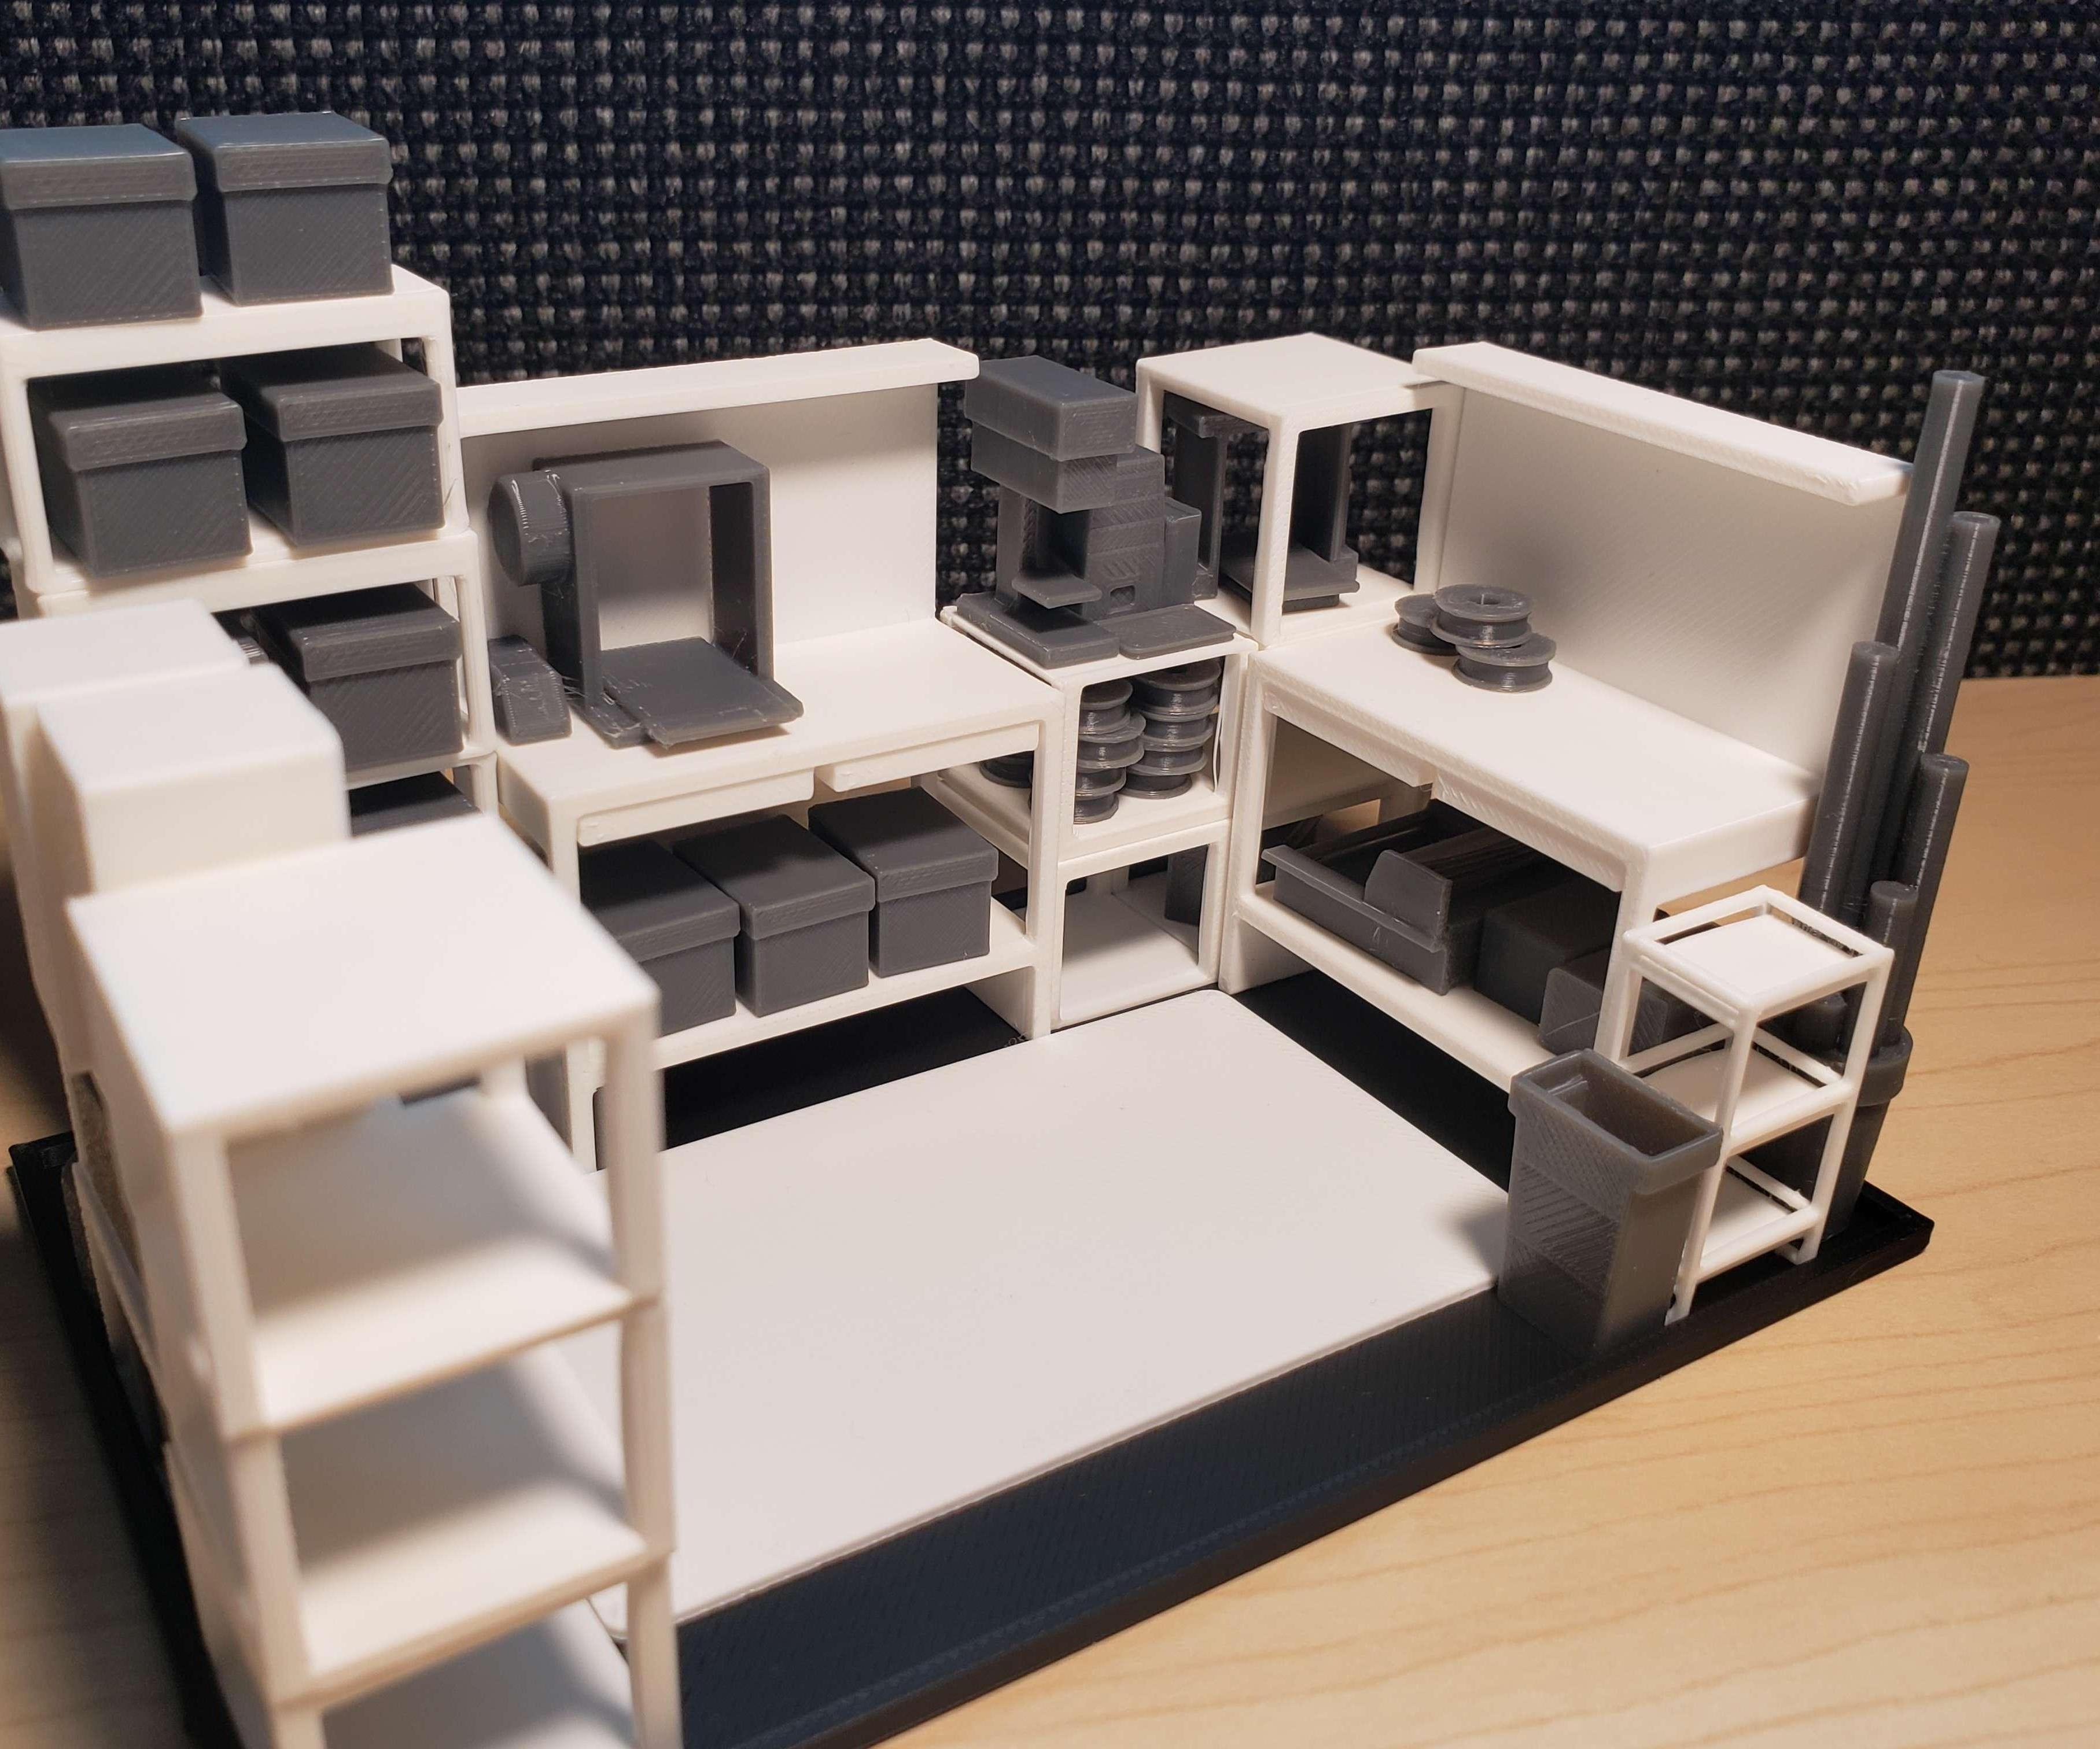 How to Efficiently Plan Your Home or Workspace With 3D Printing